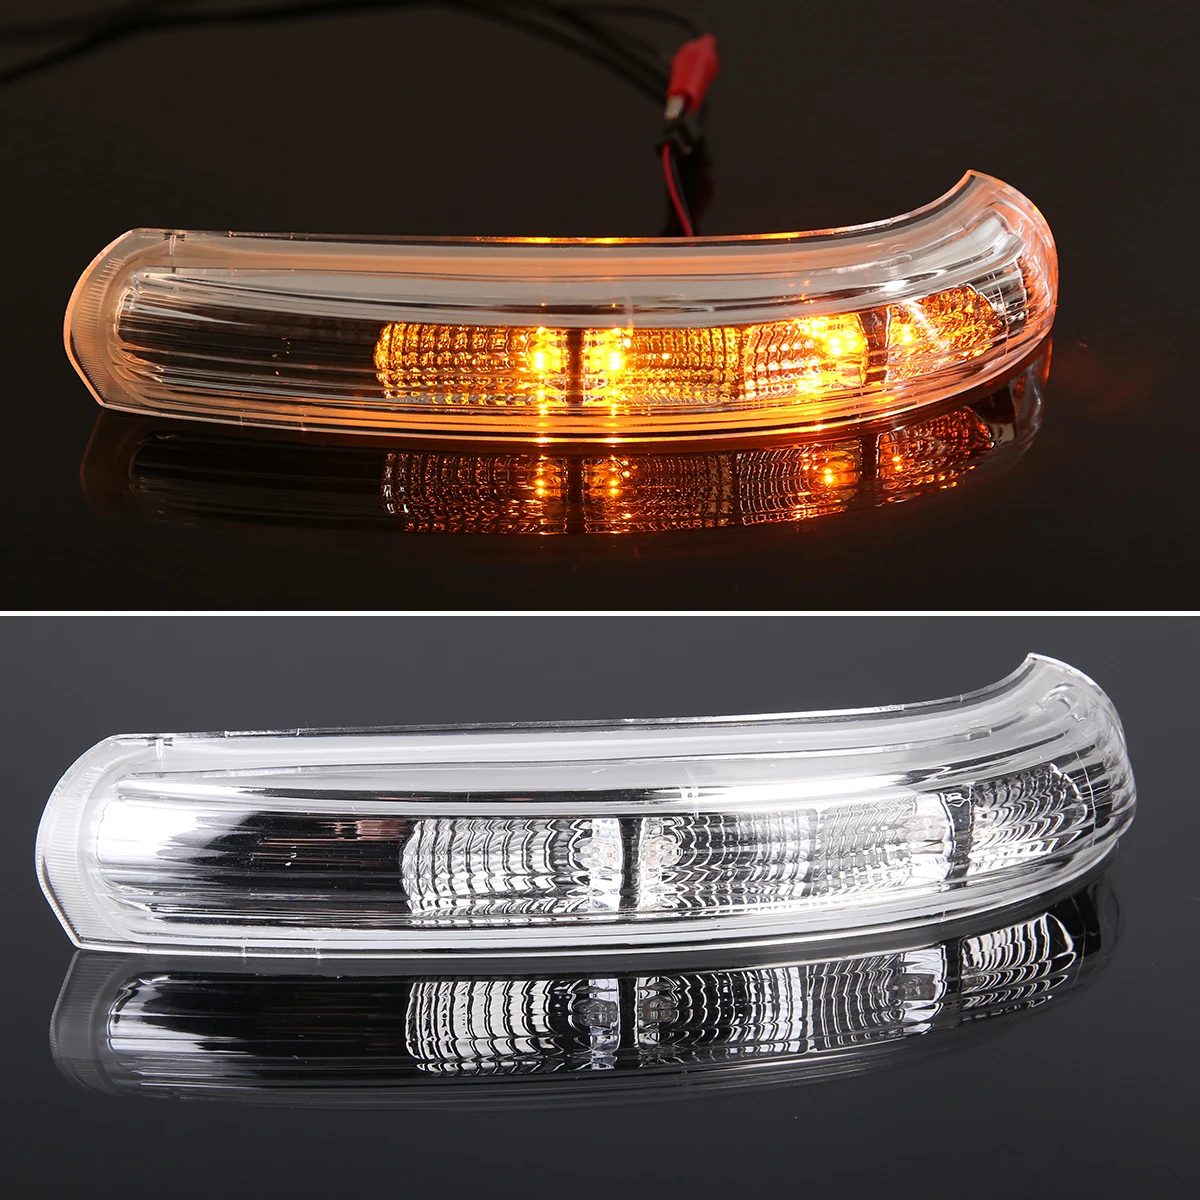 1Pcs 12V Right LED Side Mirror Turn Signal Indicator Light For 2007 Chevy Express Turn Signal Bulb